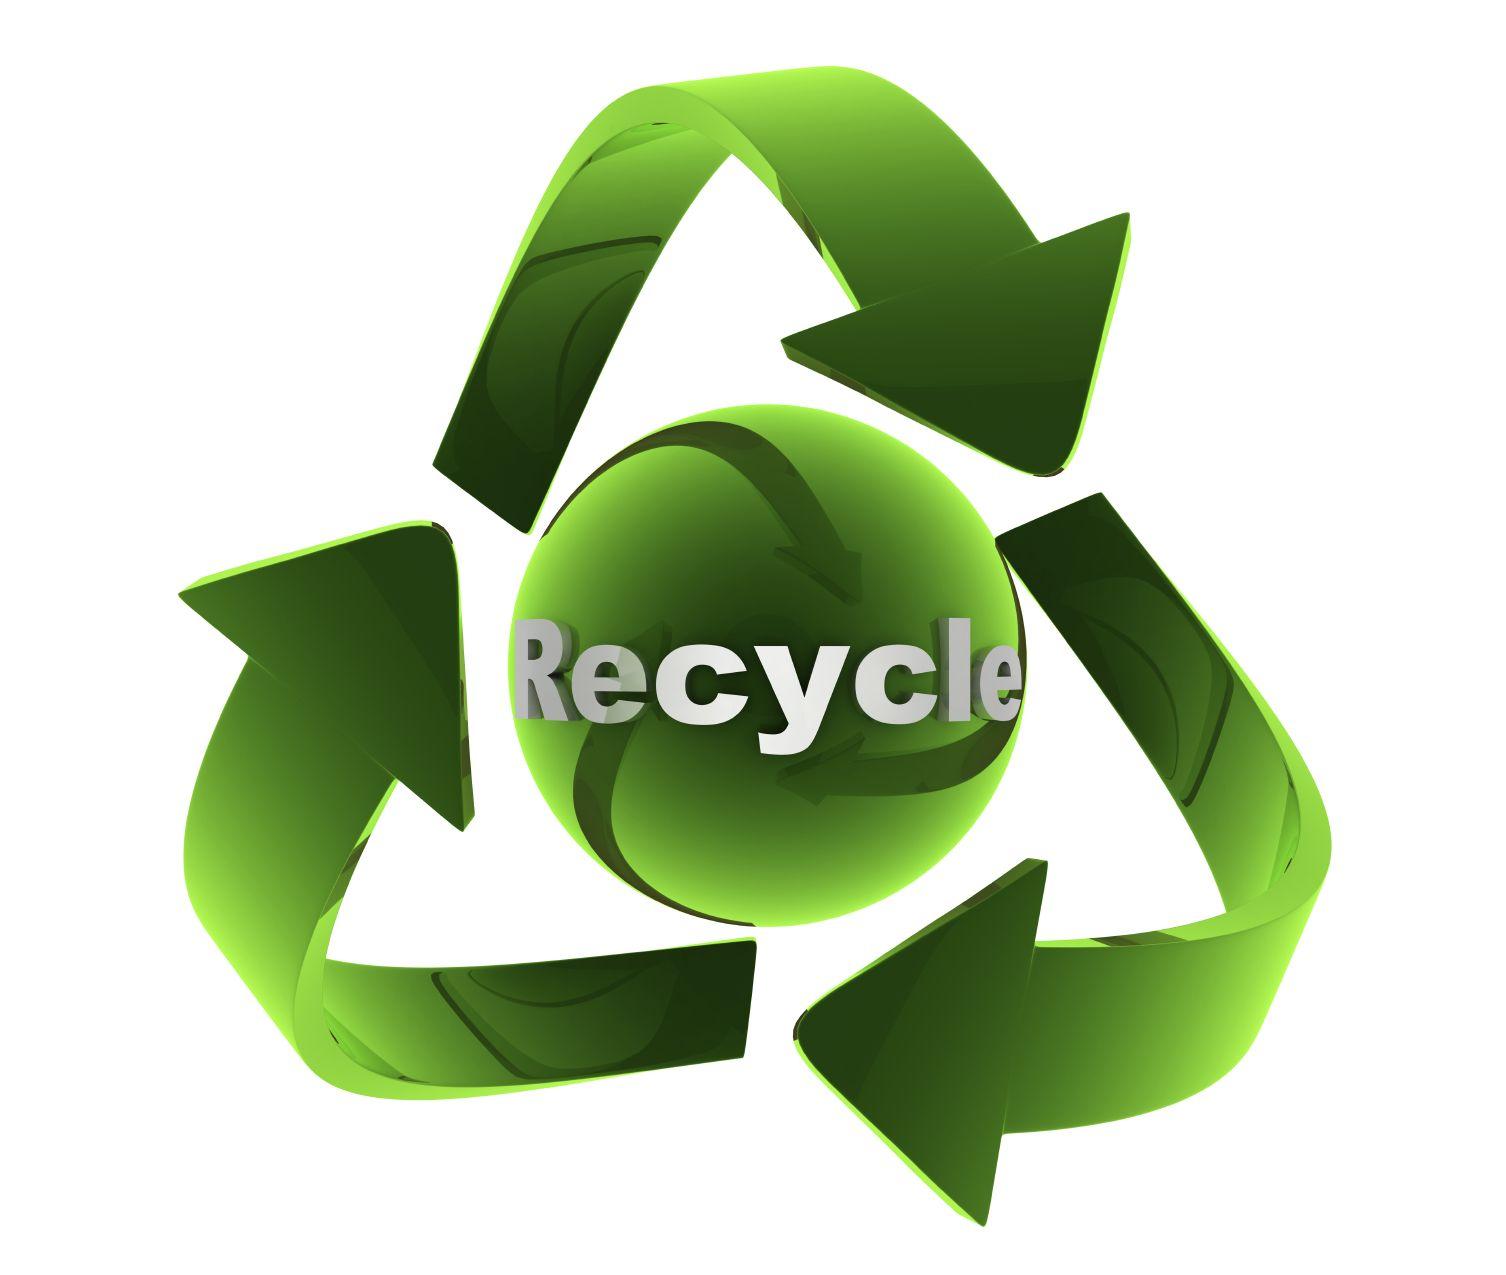 We Recycle Logo - Free Recycle Logo, Download Free Clip Art, Free Clip Art on Clipart ...